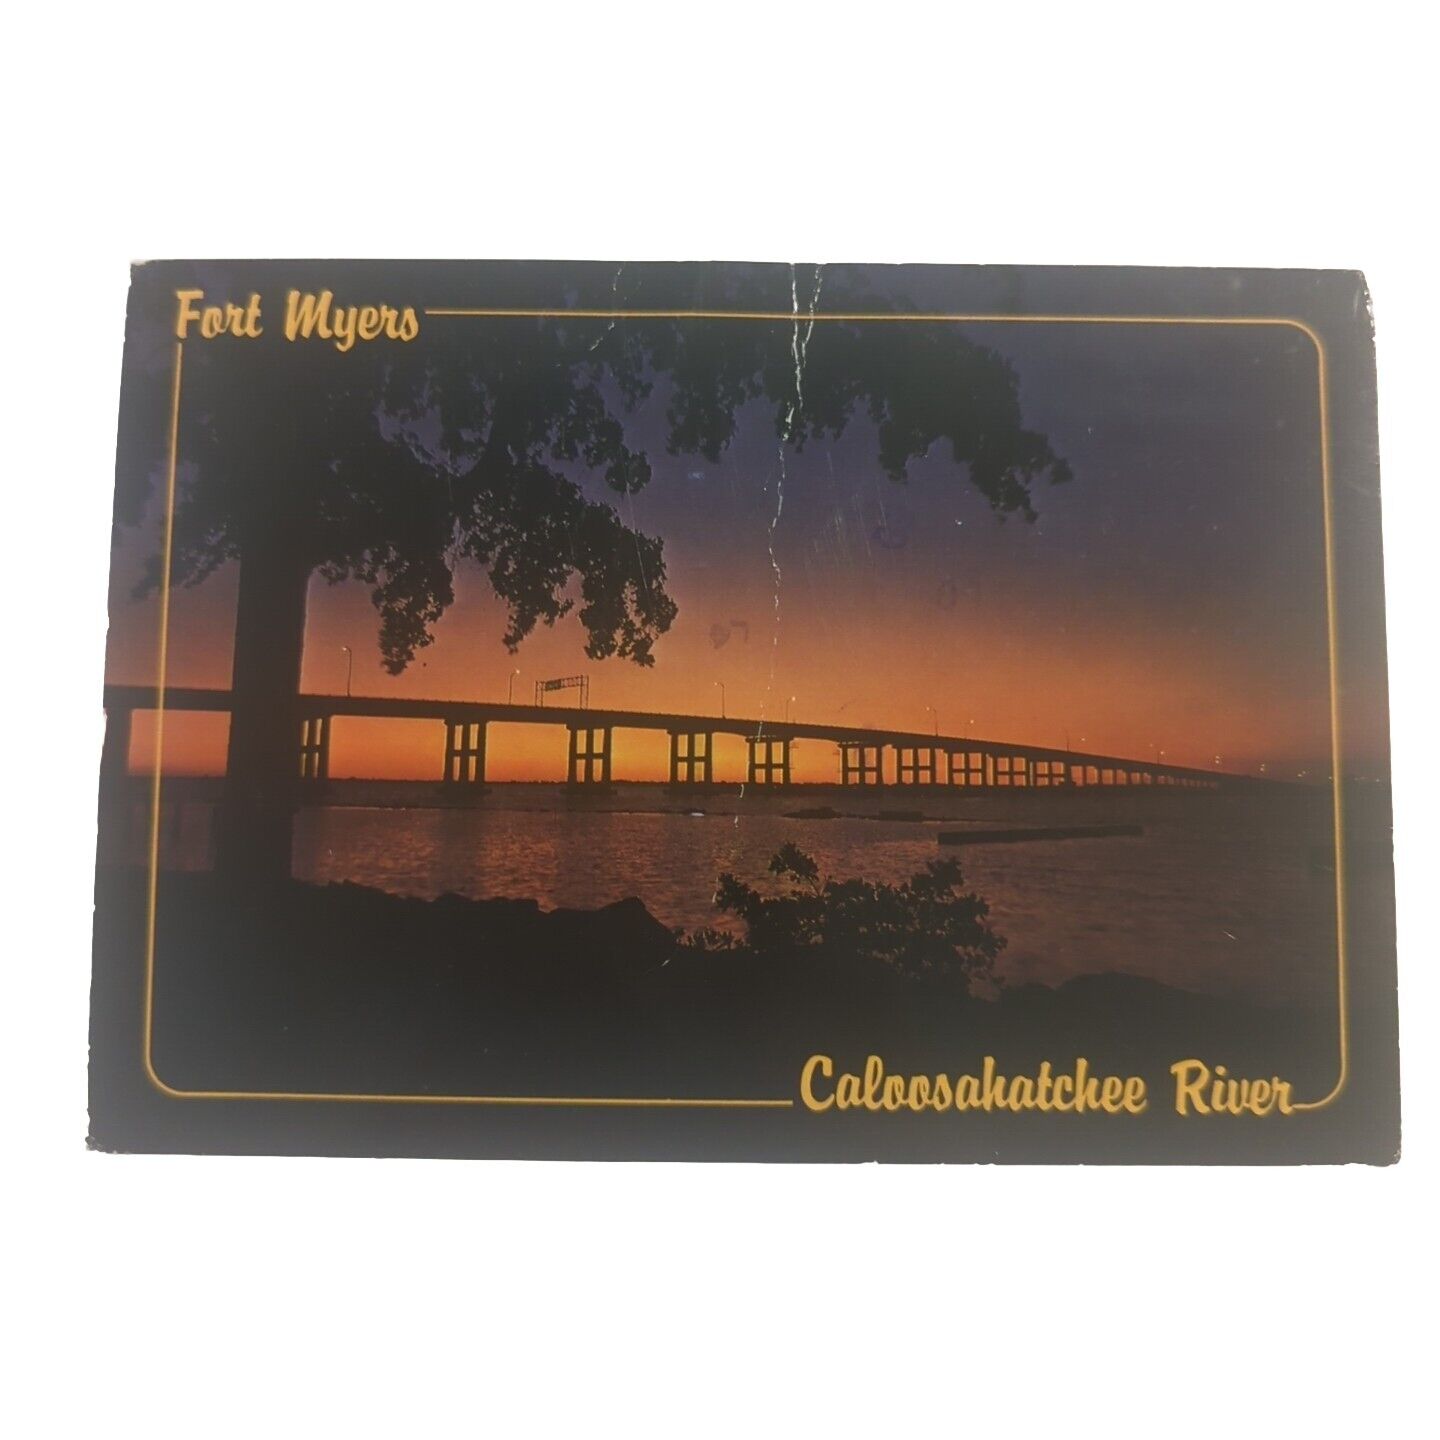 Postcard Caloosahatchee River Sunset FL 1990  Fort Myers Posted Creased 1.10.17